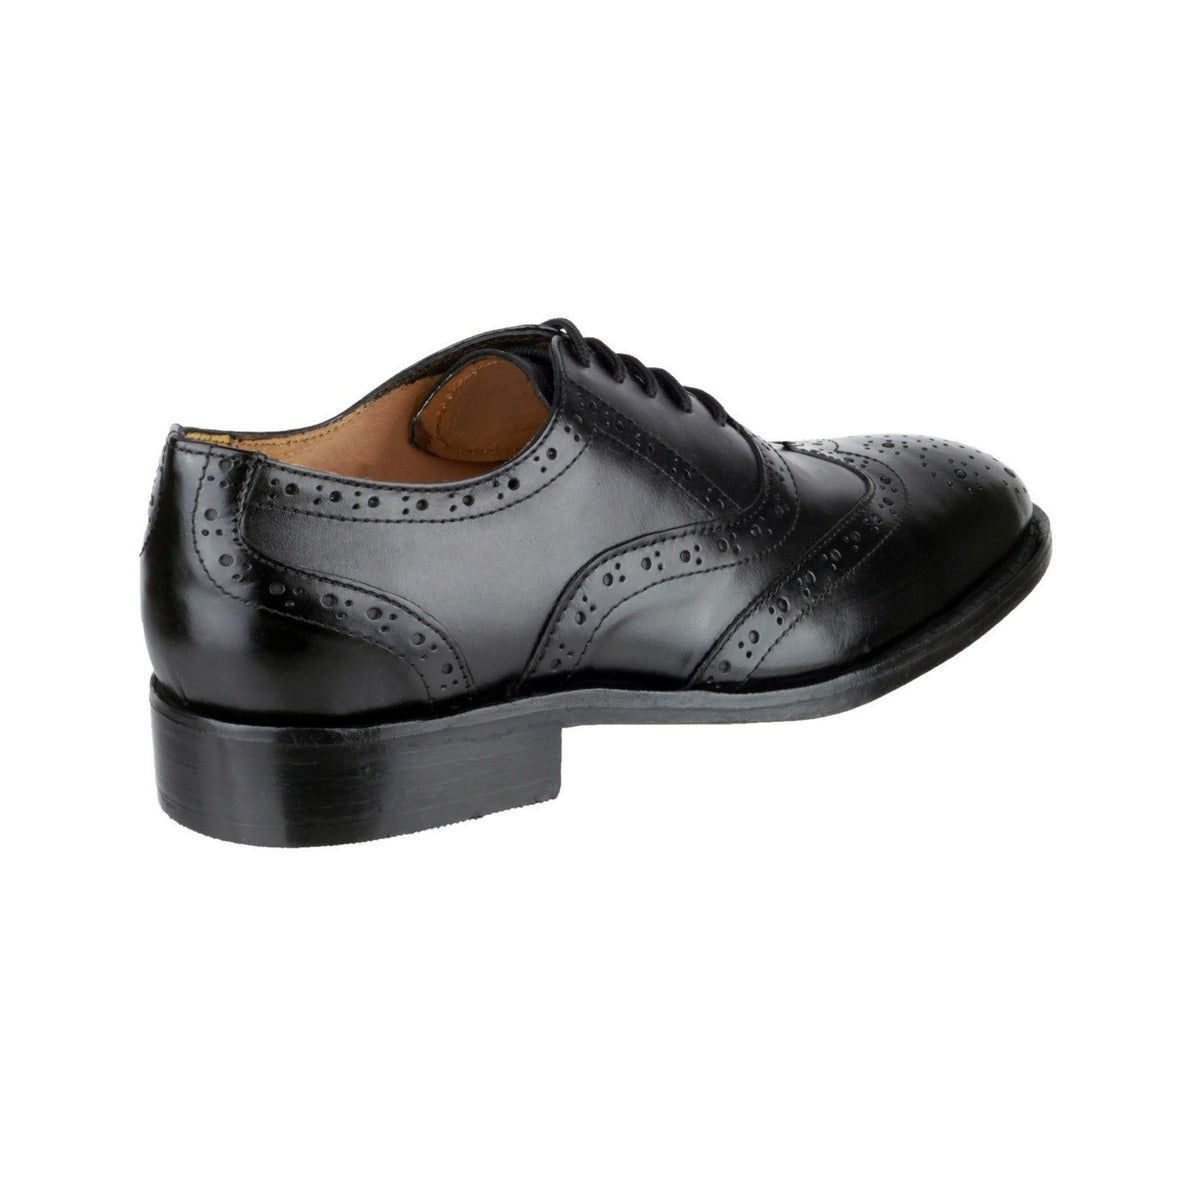 Amblers Ben Leather Soled Oxford Brogue